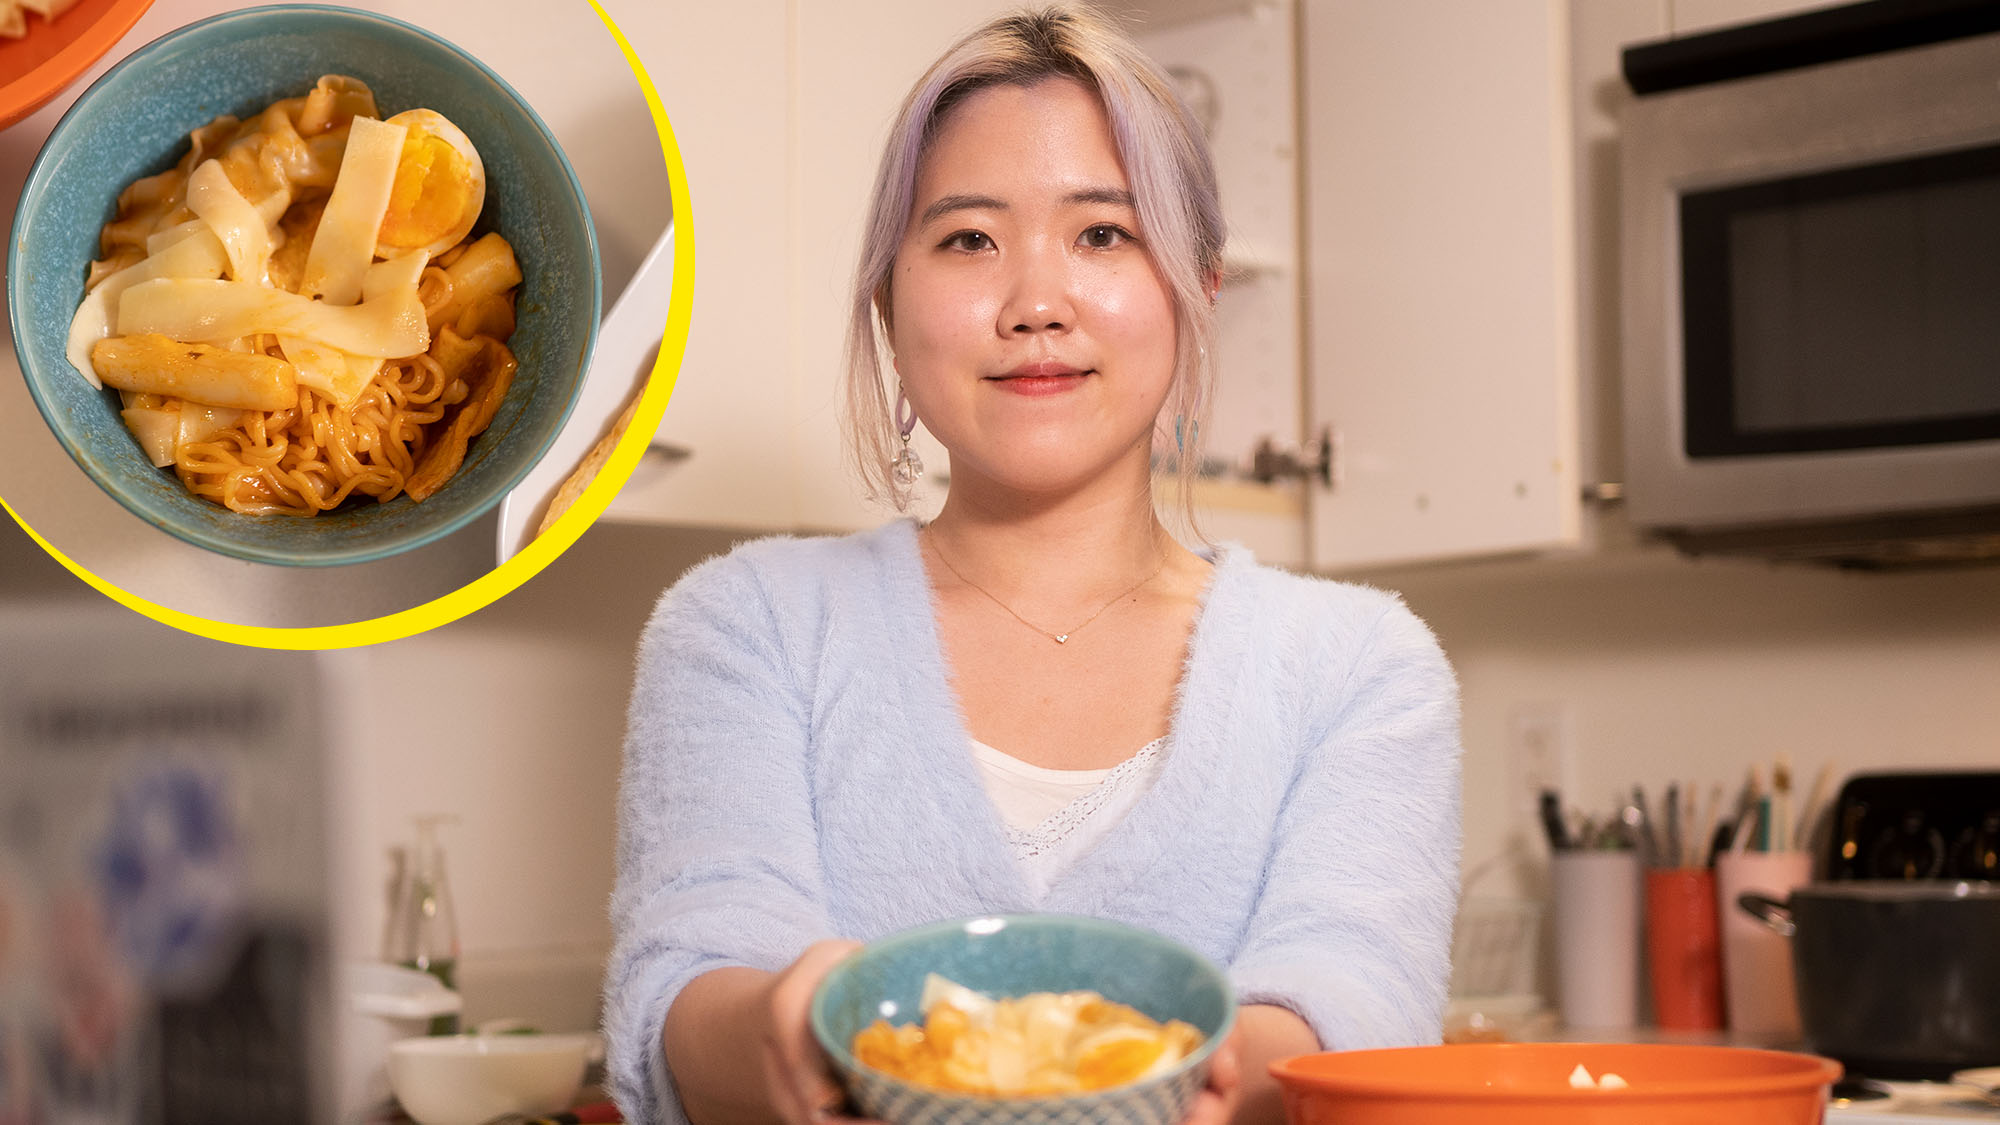 Photo of Sophie Lee (Questrom’22), wearing a light blue sweater and smiling, as she holds a teal bowl of Tteokbokki in front of her. Overlaid on the photo at the top left is a top-down view of the bowl of Tteokbokki, which has noodles, a reddish sauce and a soft-boiled egg.